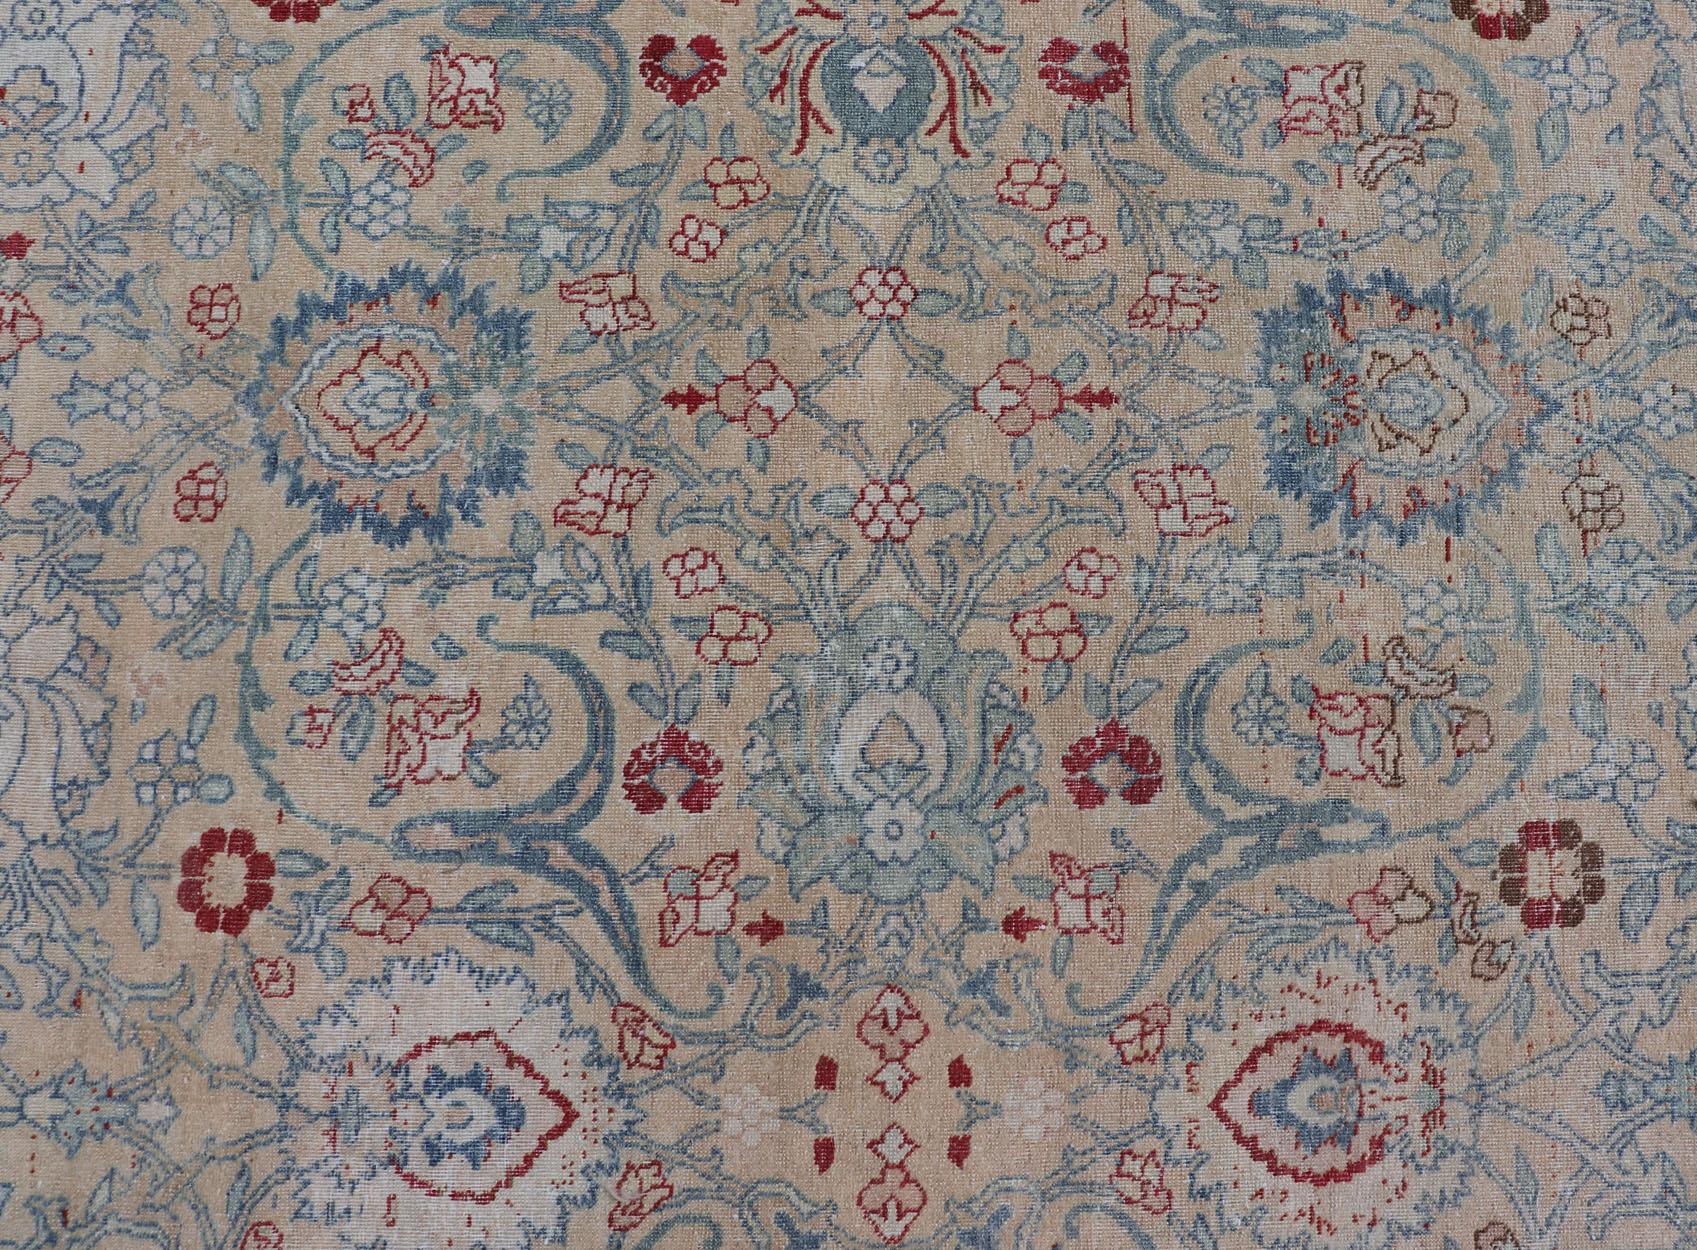  Antique Persian Khorassan Rug with Floral Design in Honey Cream & Dusty Blue For Sale 6